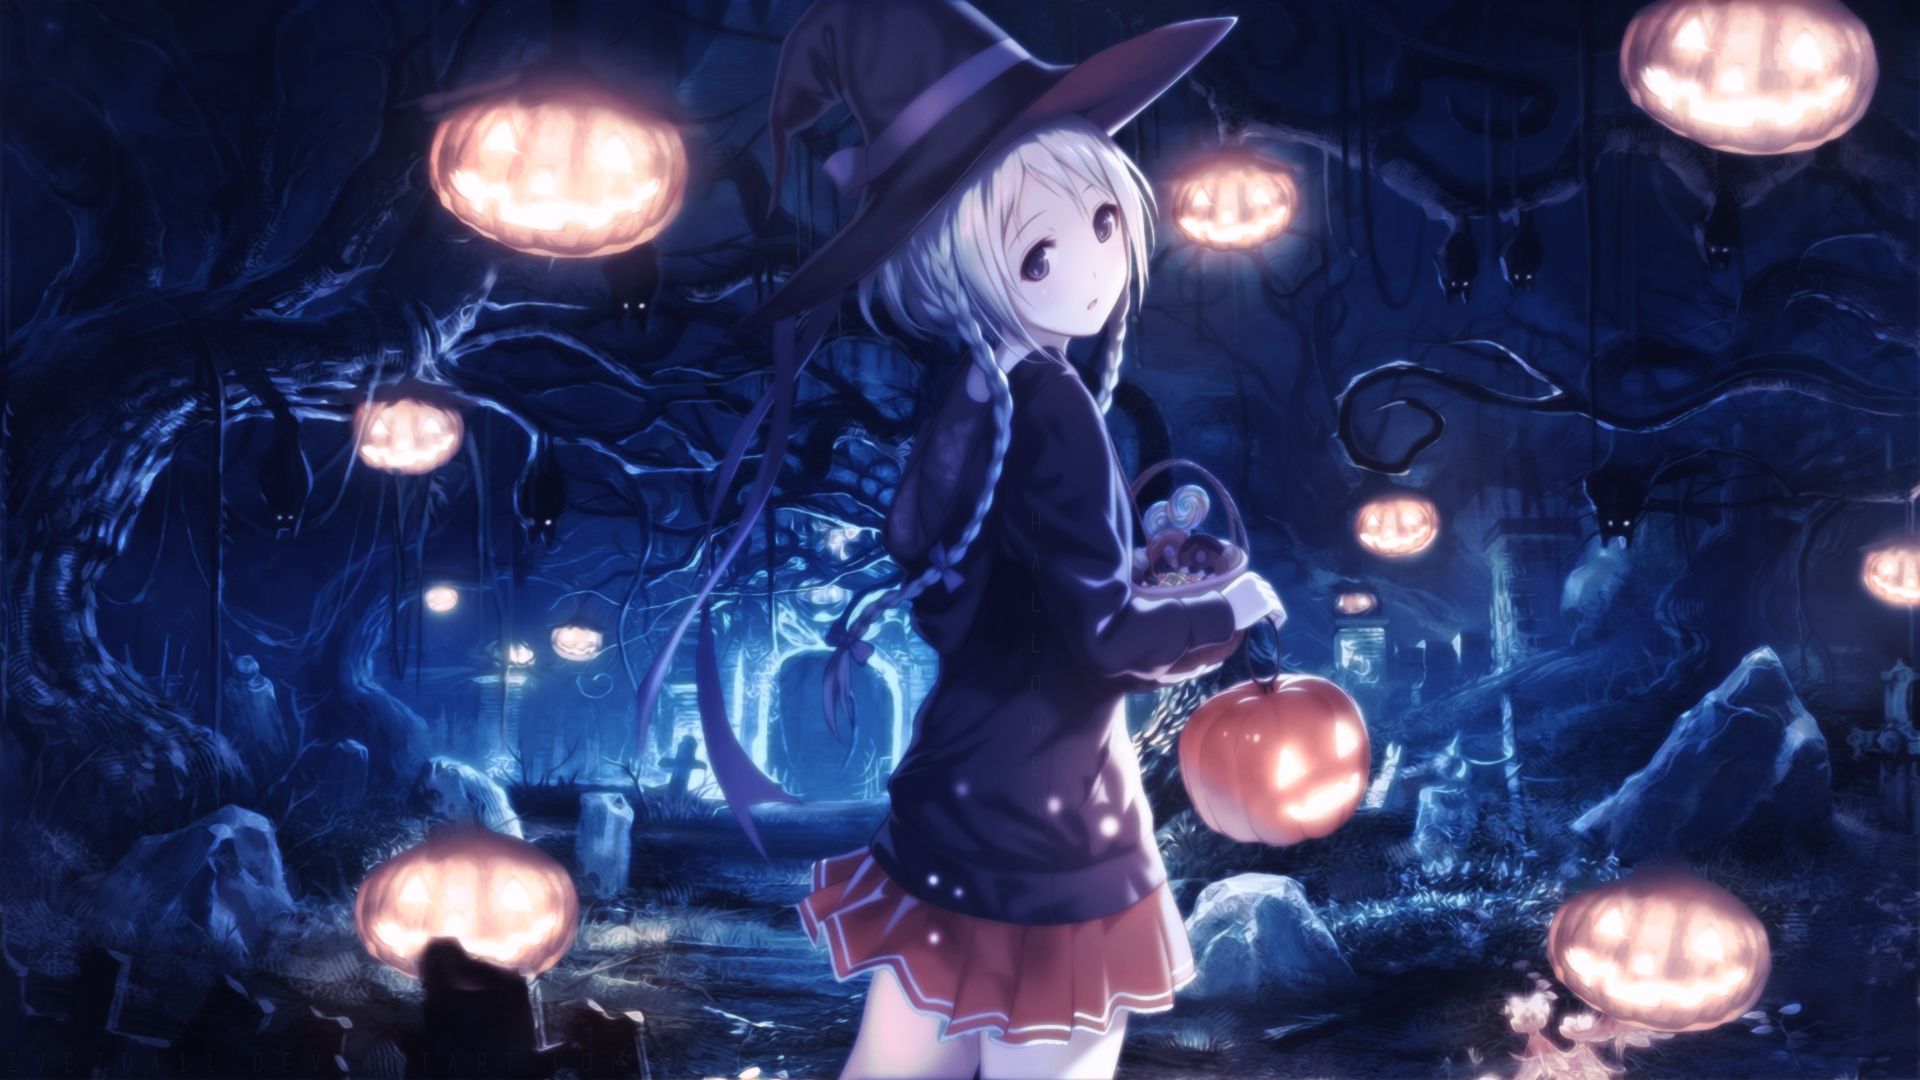 Download 1920x1080 Anime Girl, Witch Hat, White Hair, Dark Forest, Pumpkins, Braids Wallpaper for Widescreen